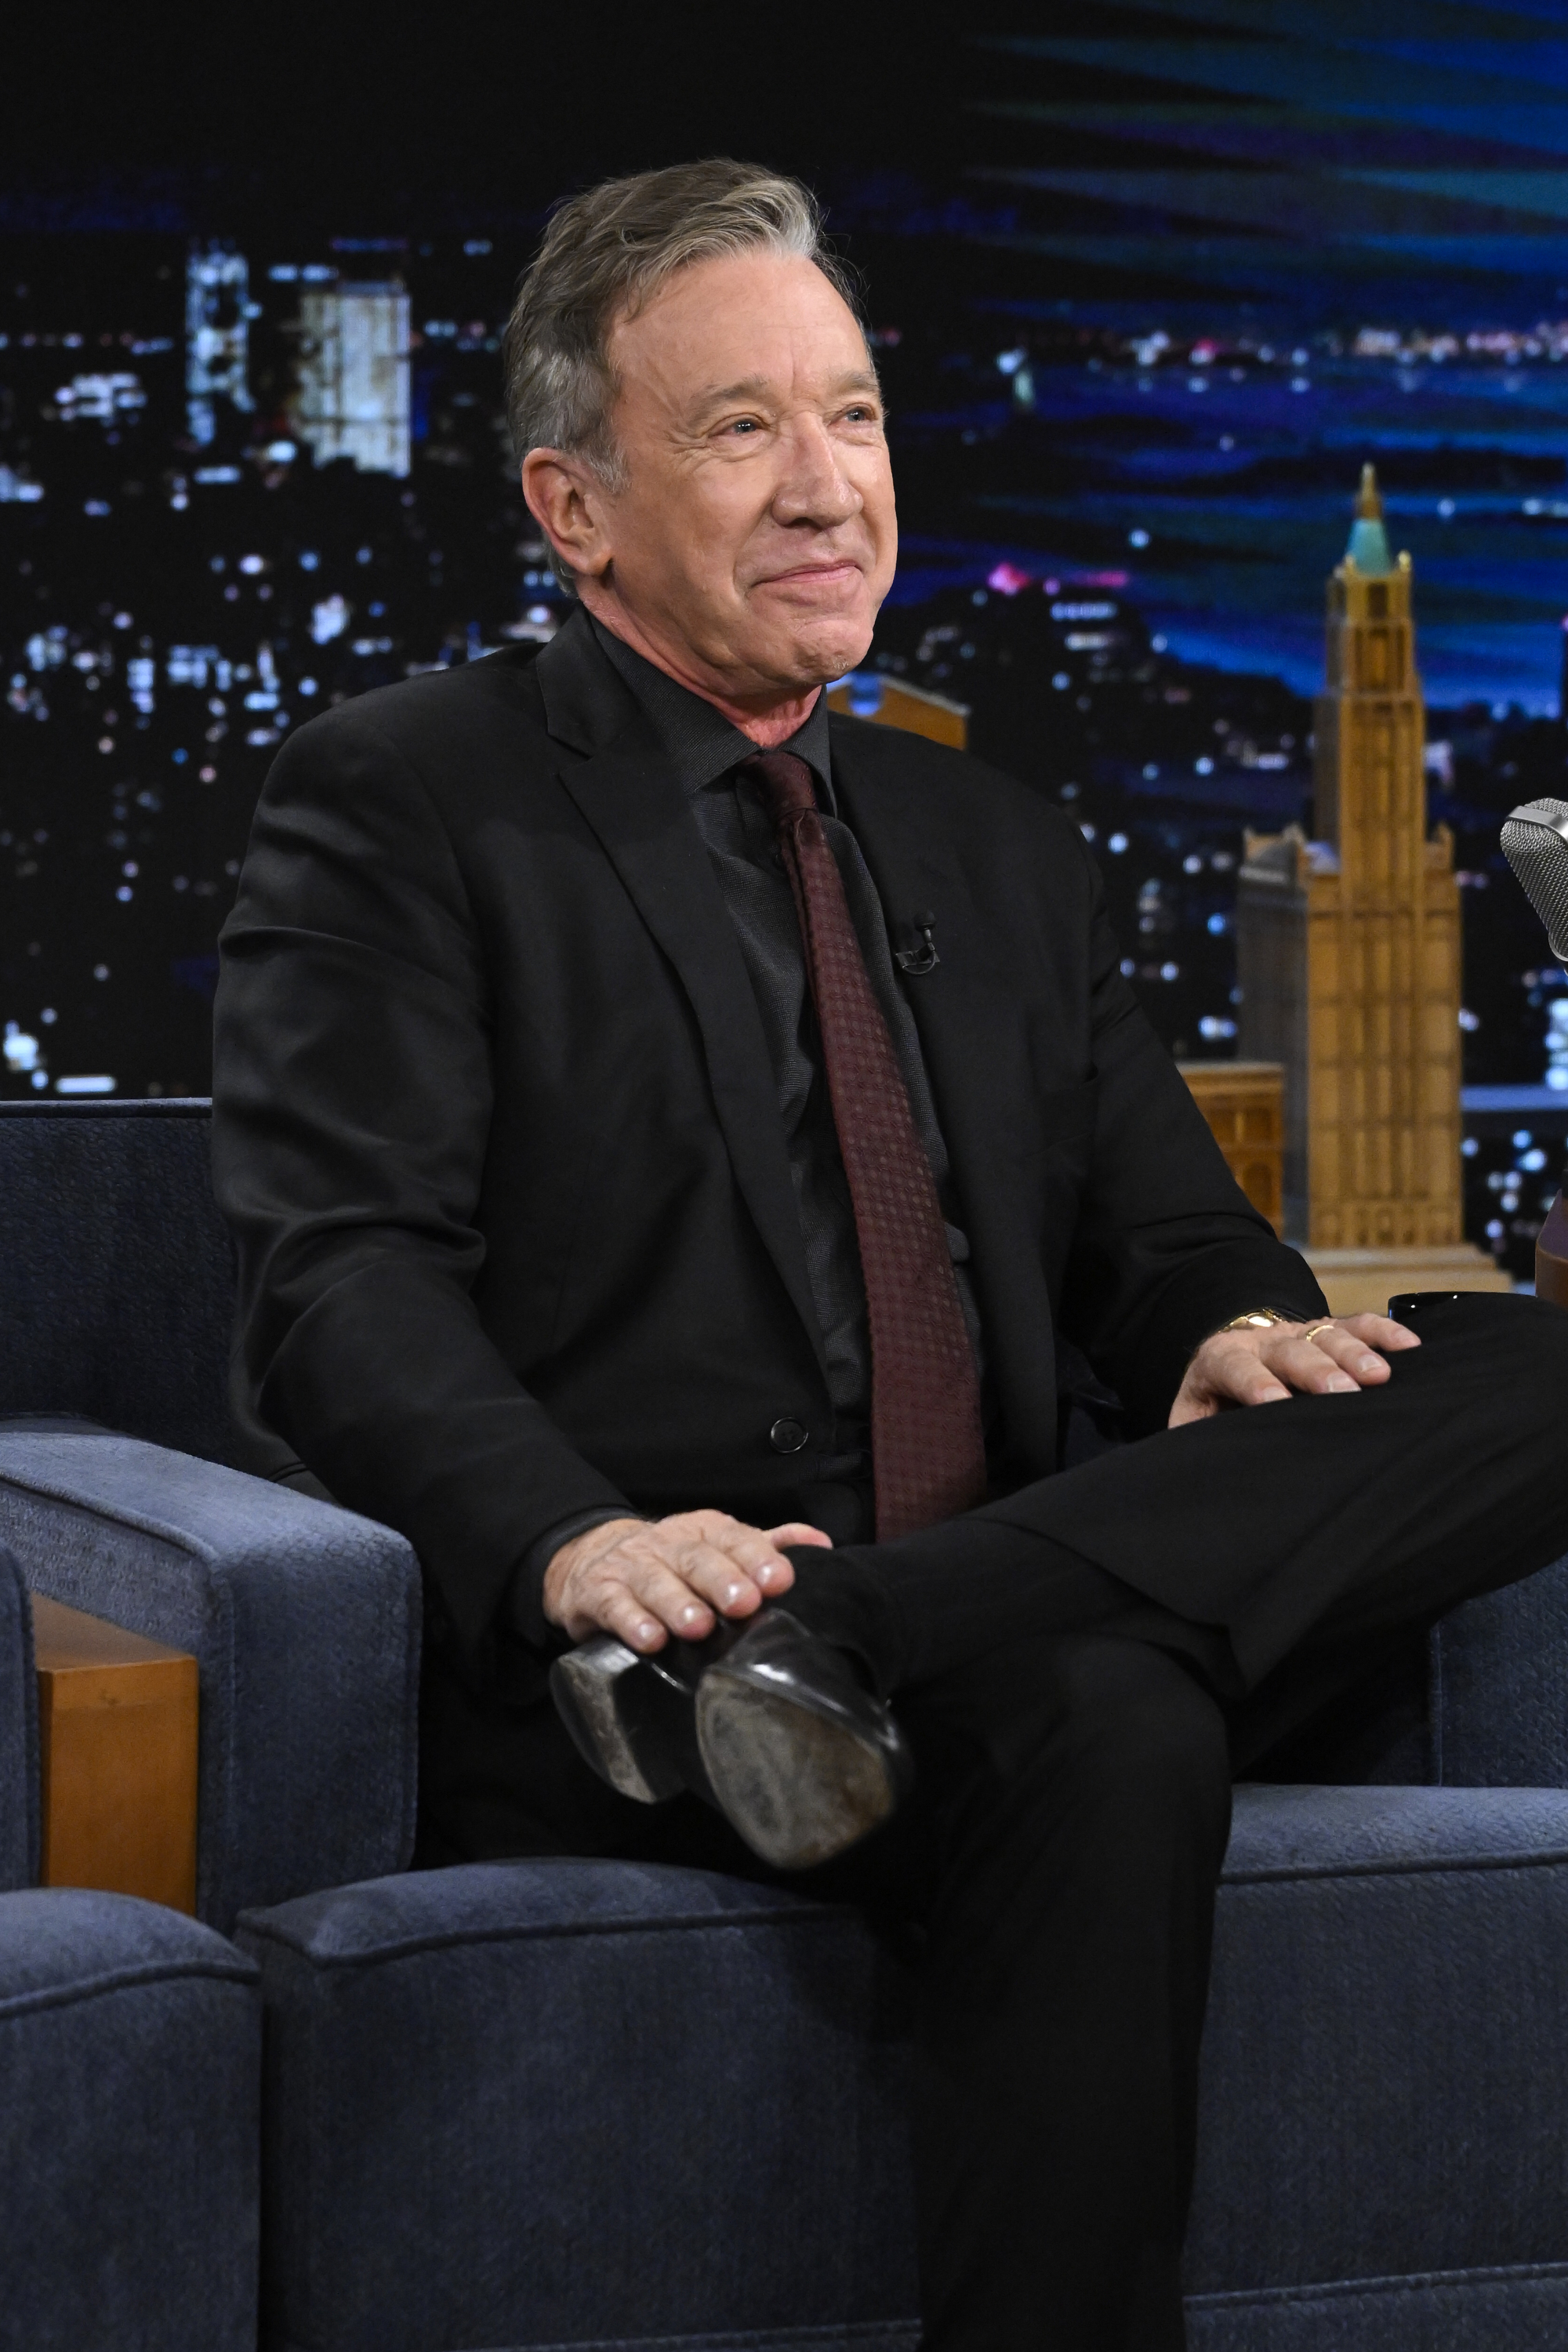 Person seated on a talk show set, wearing a black suit and looking off-camera with a relaxed expression